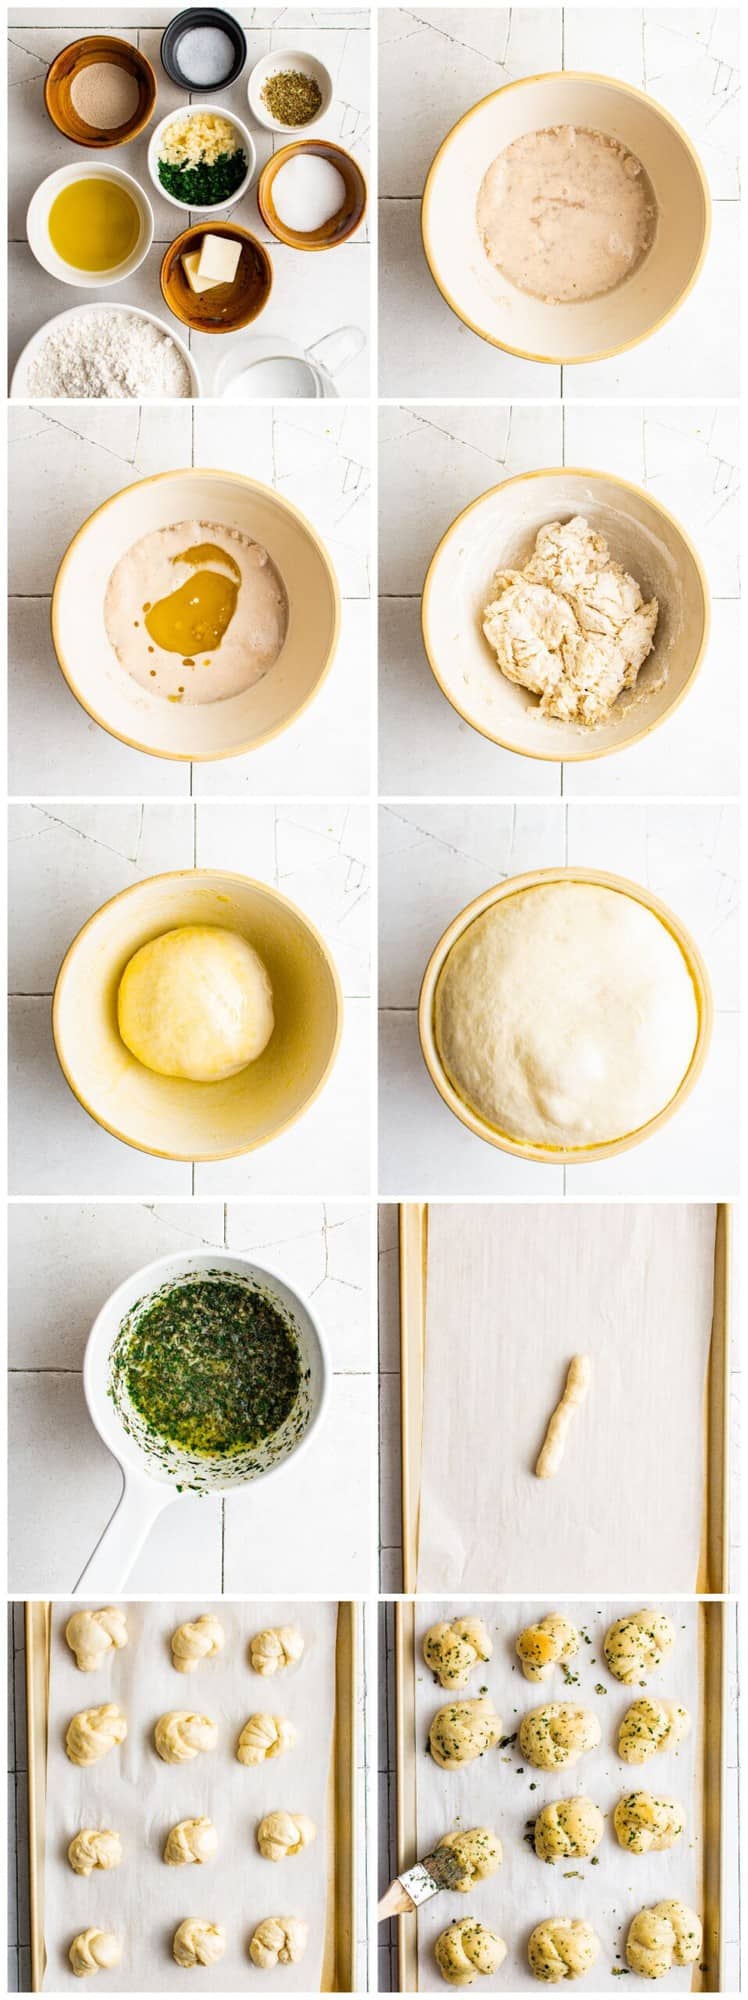 step by step photos for how to make garlic knots